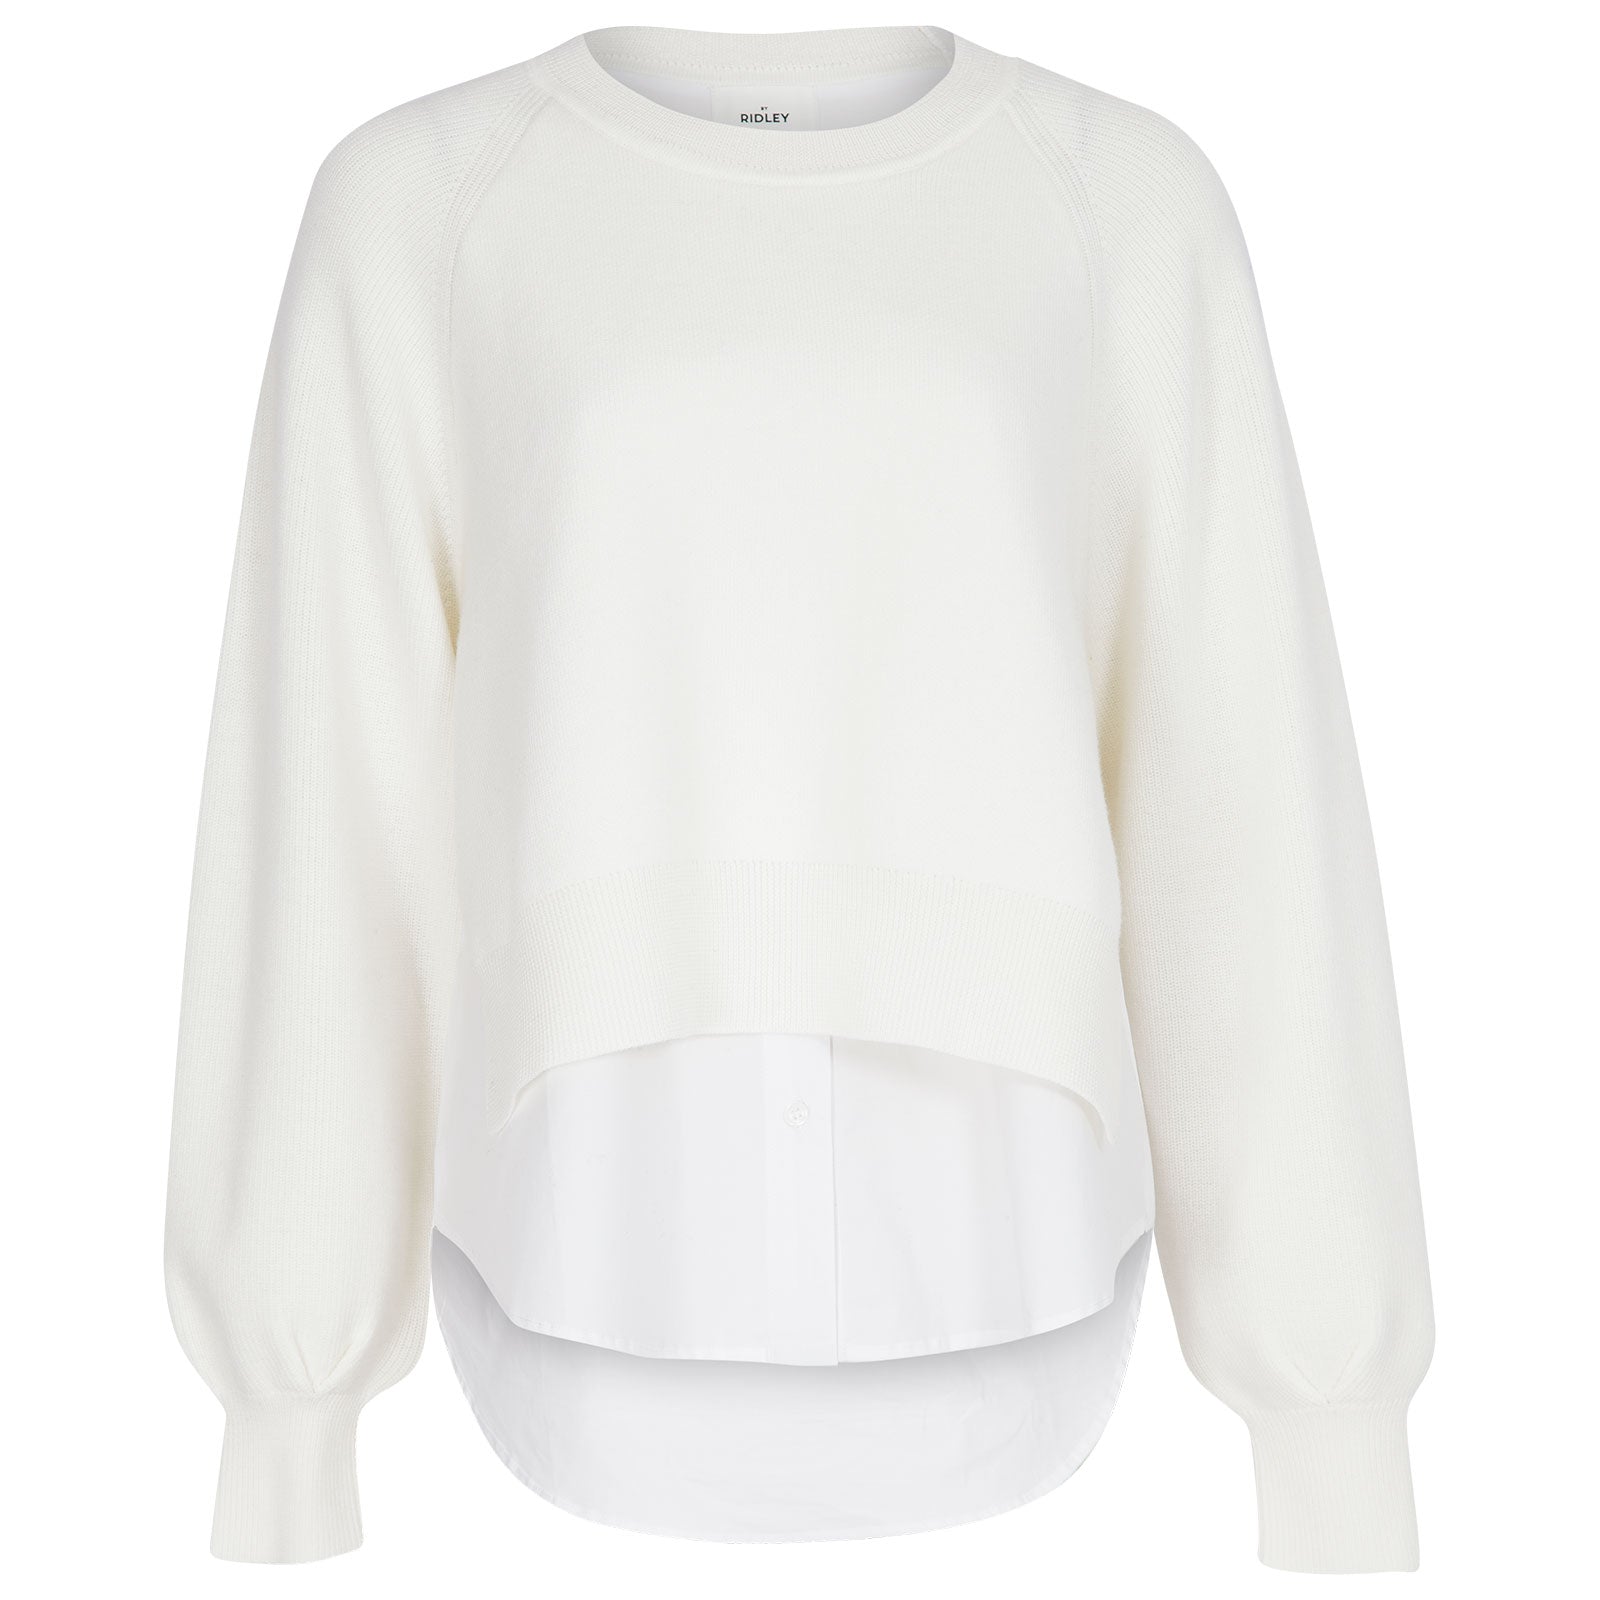 Kathryn Sweater - Ivory/White Shirt-Knitwear & Jumpers-By RIDLEY-The Bay Room